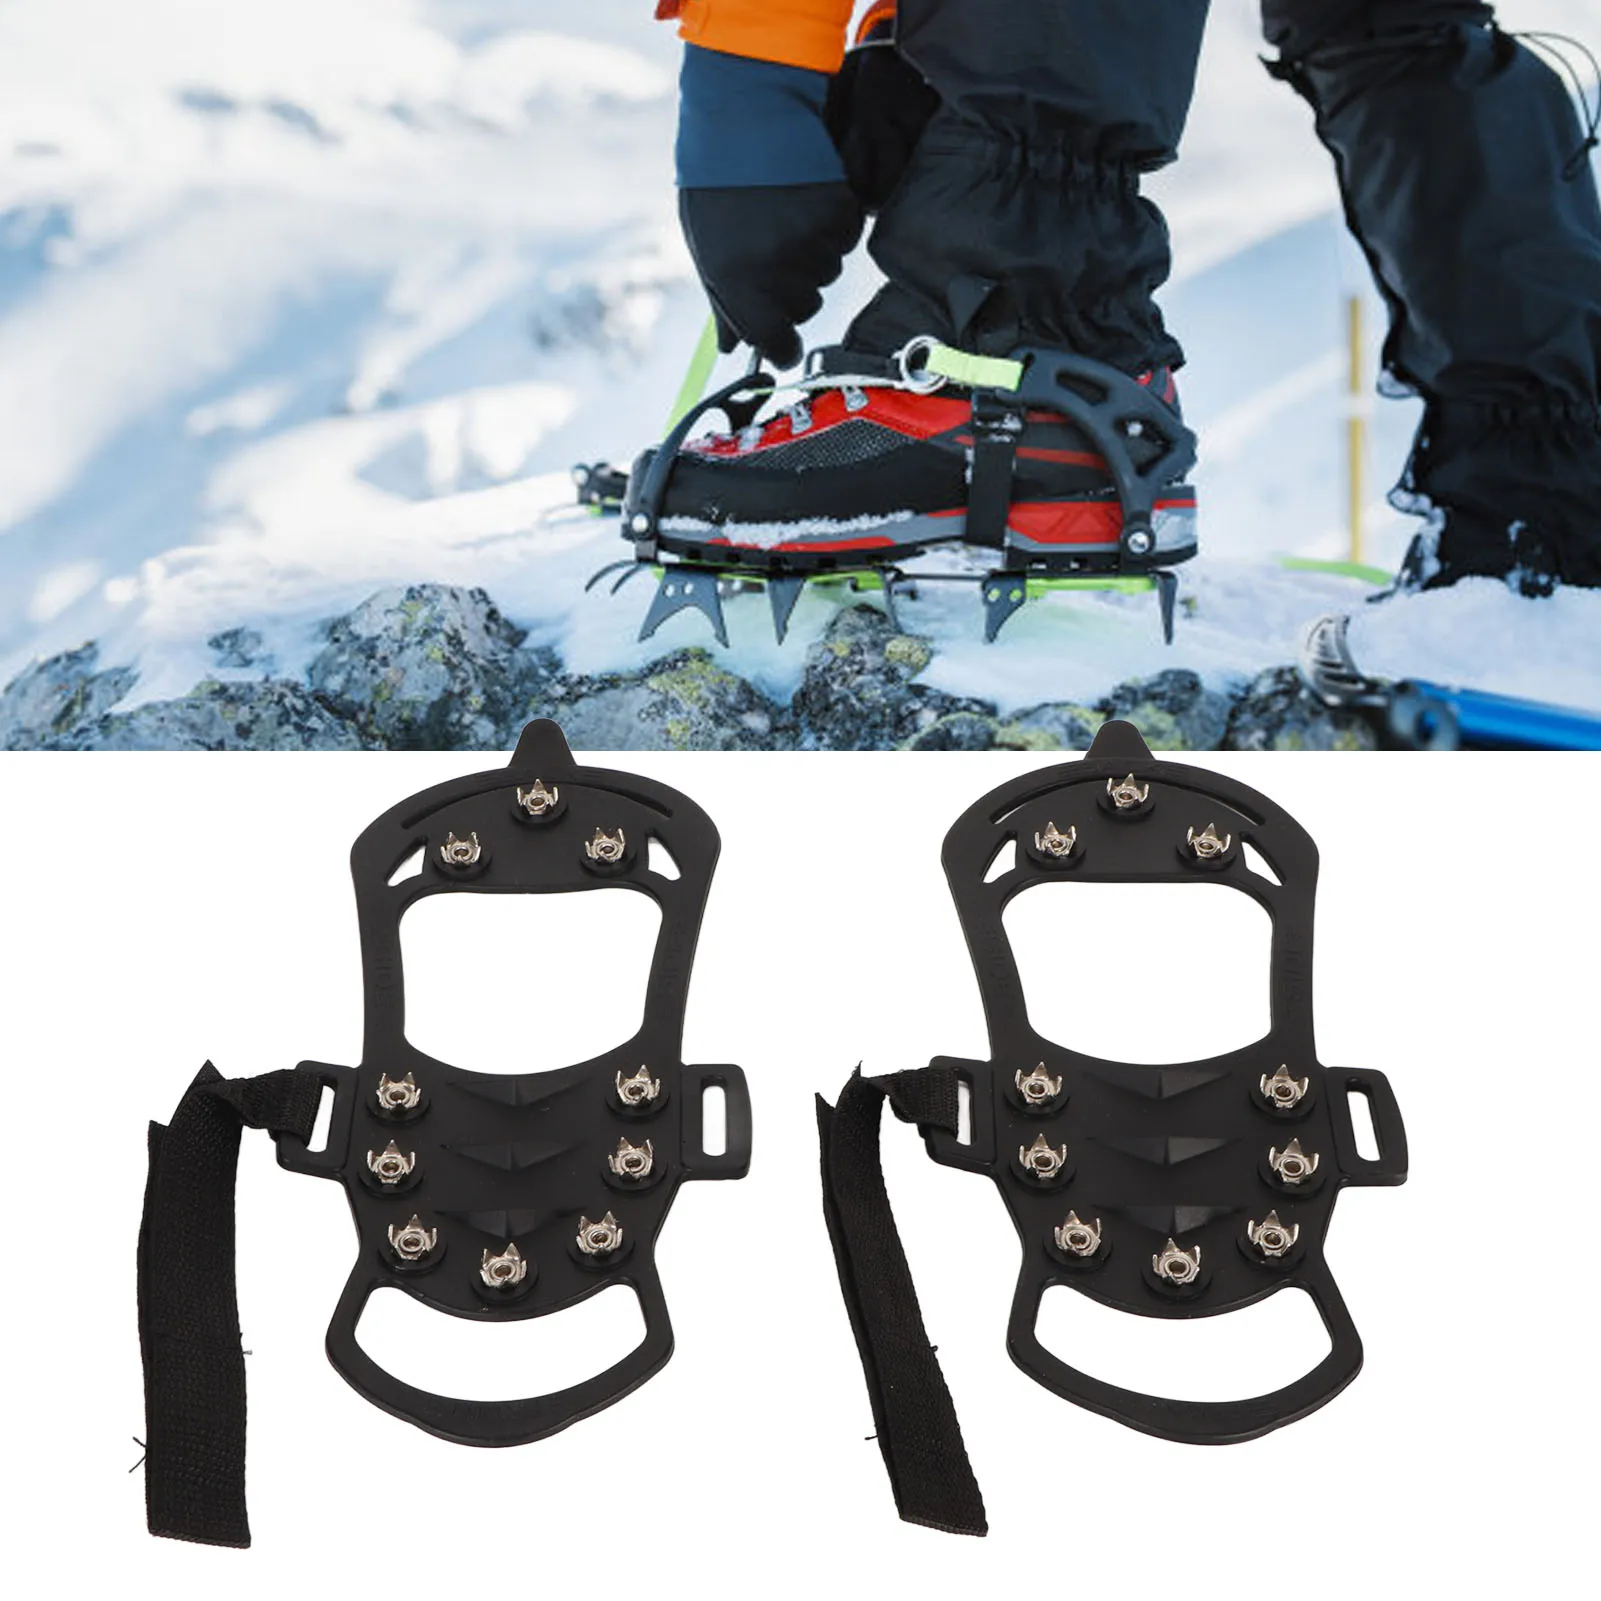 

1Pair 10-Tooth Anti-Skid Ice Gripper Spike Winter Climbing Anti-Slip Snow Spikes Grips Cleats Over Shoes Covers Crampon Dropship